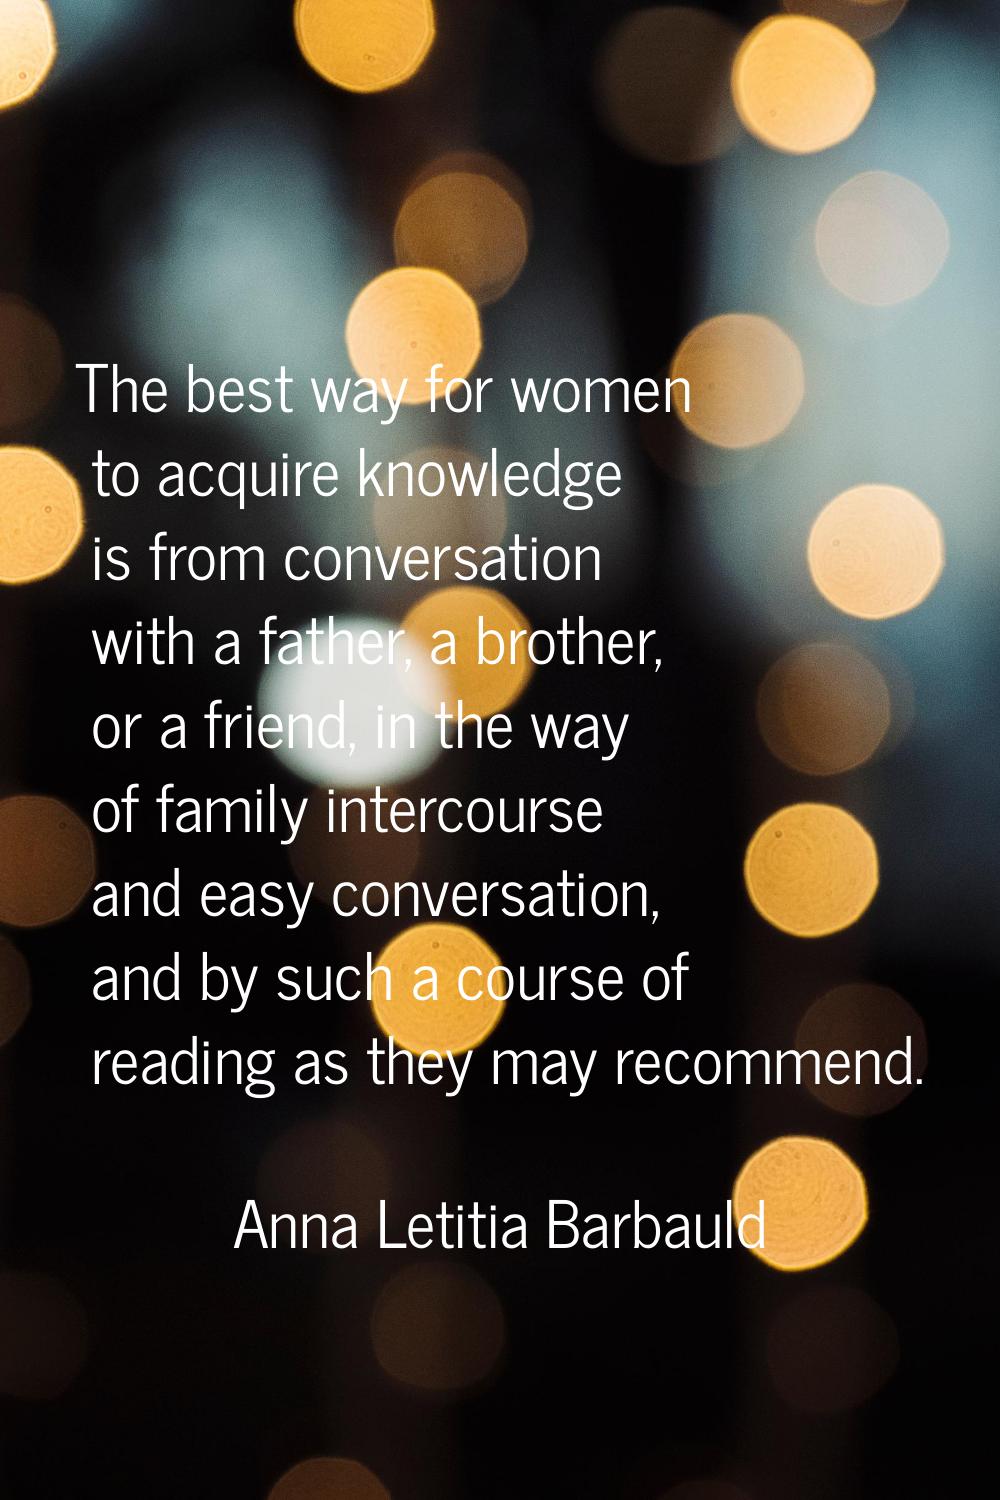 The best way for women to acquire knowledge is from conversation with a father, a brother, or a fri